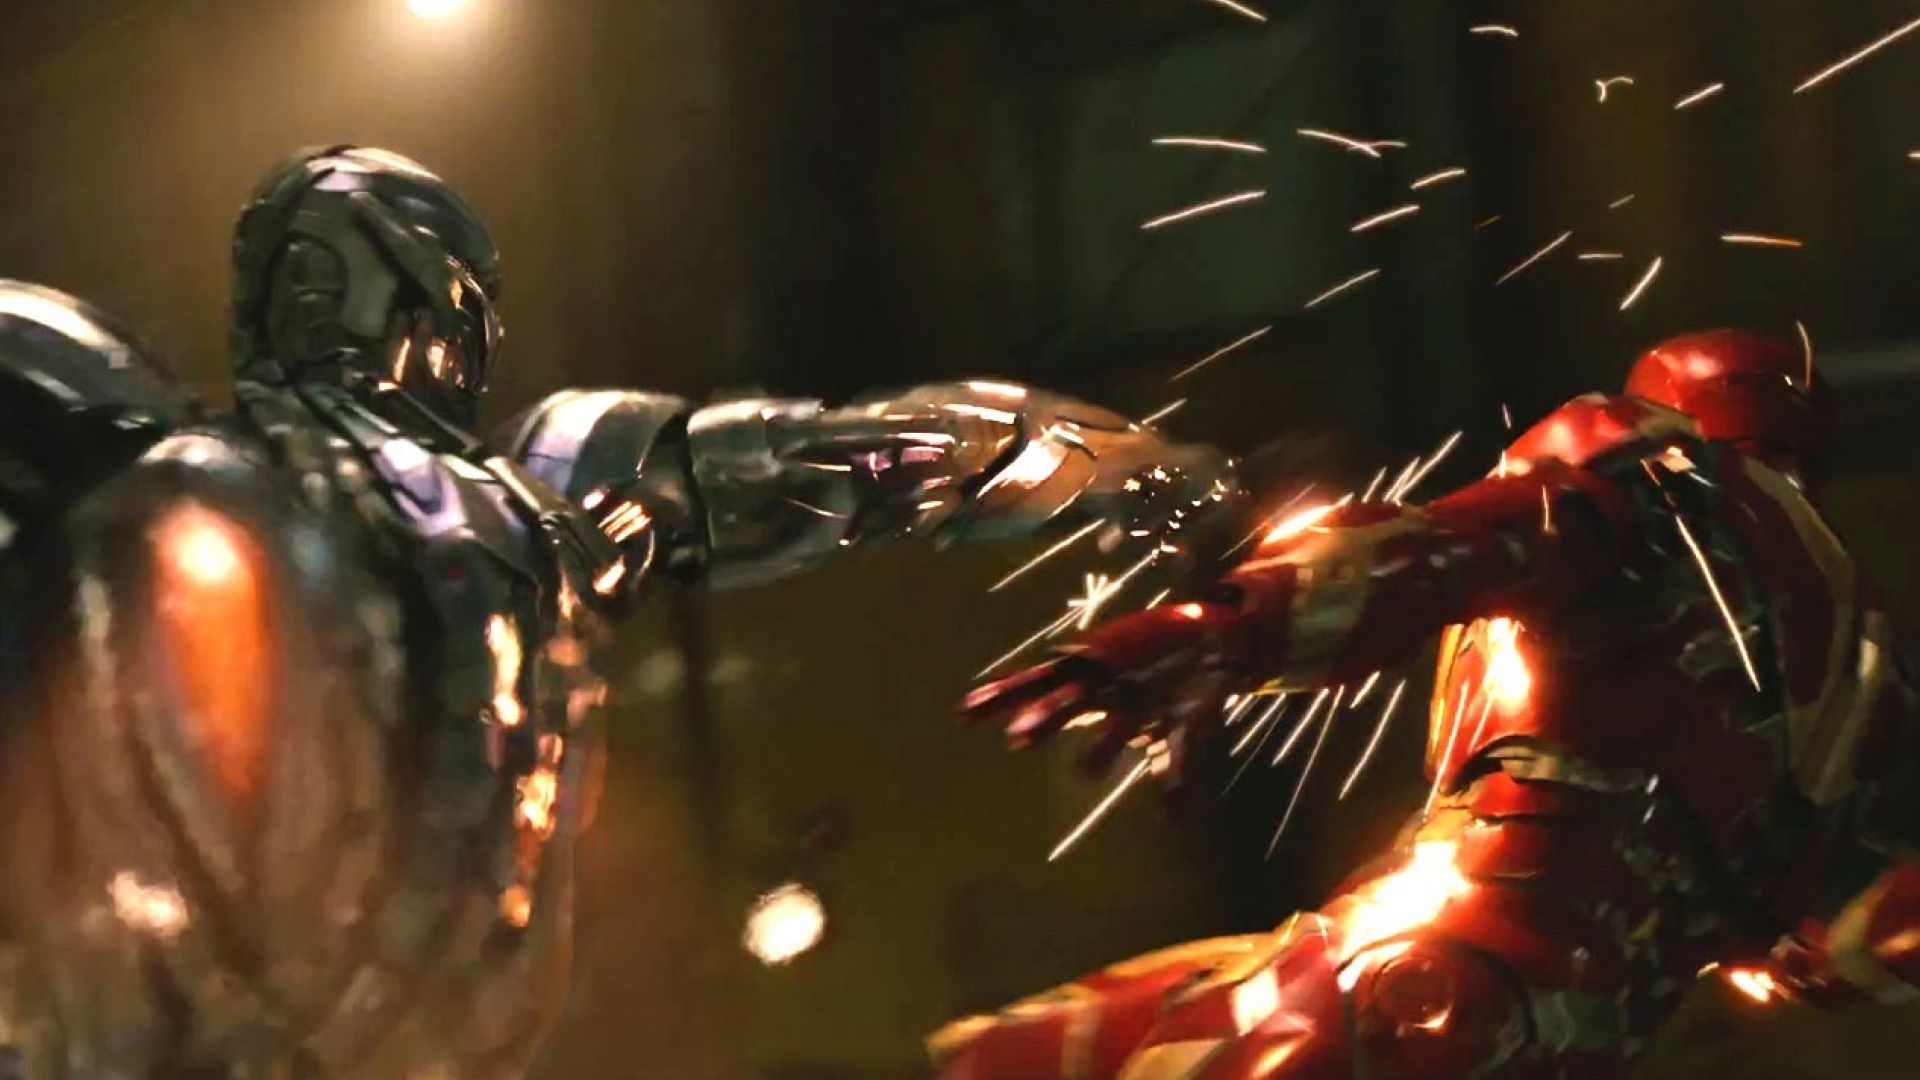 Iron Man Battles Ultron in New &#039;Avengers: Age of Ultron&#039; Cli